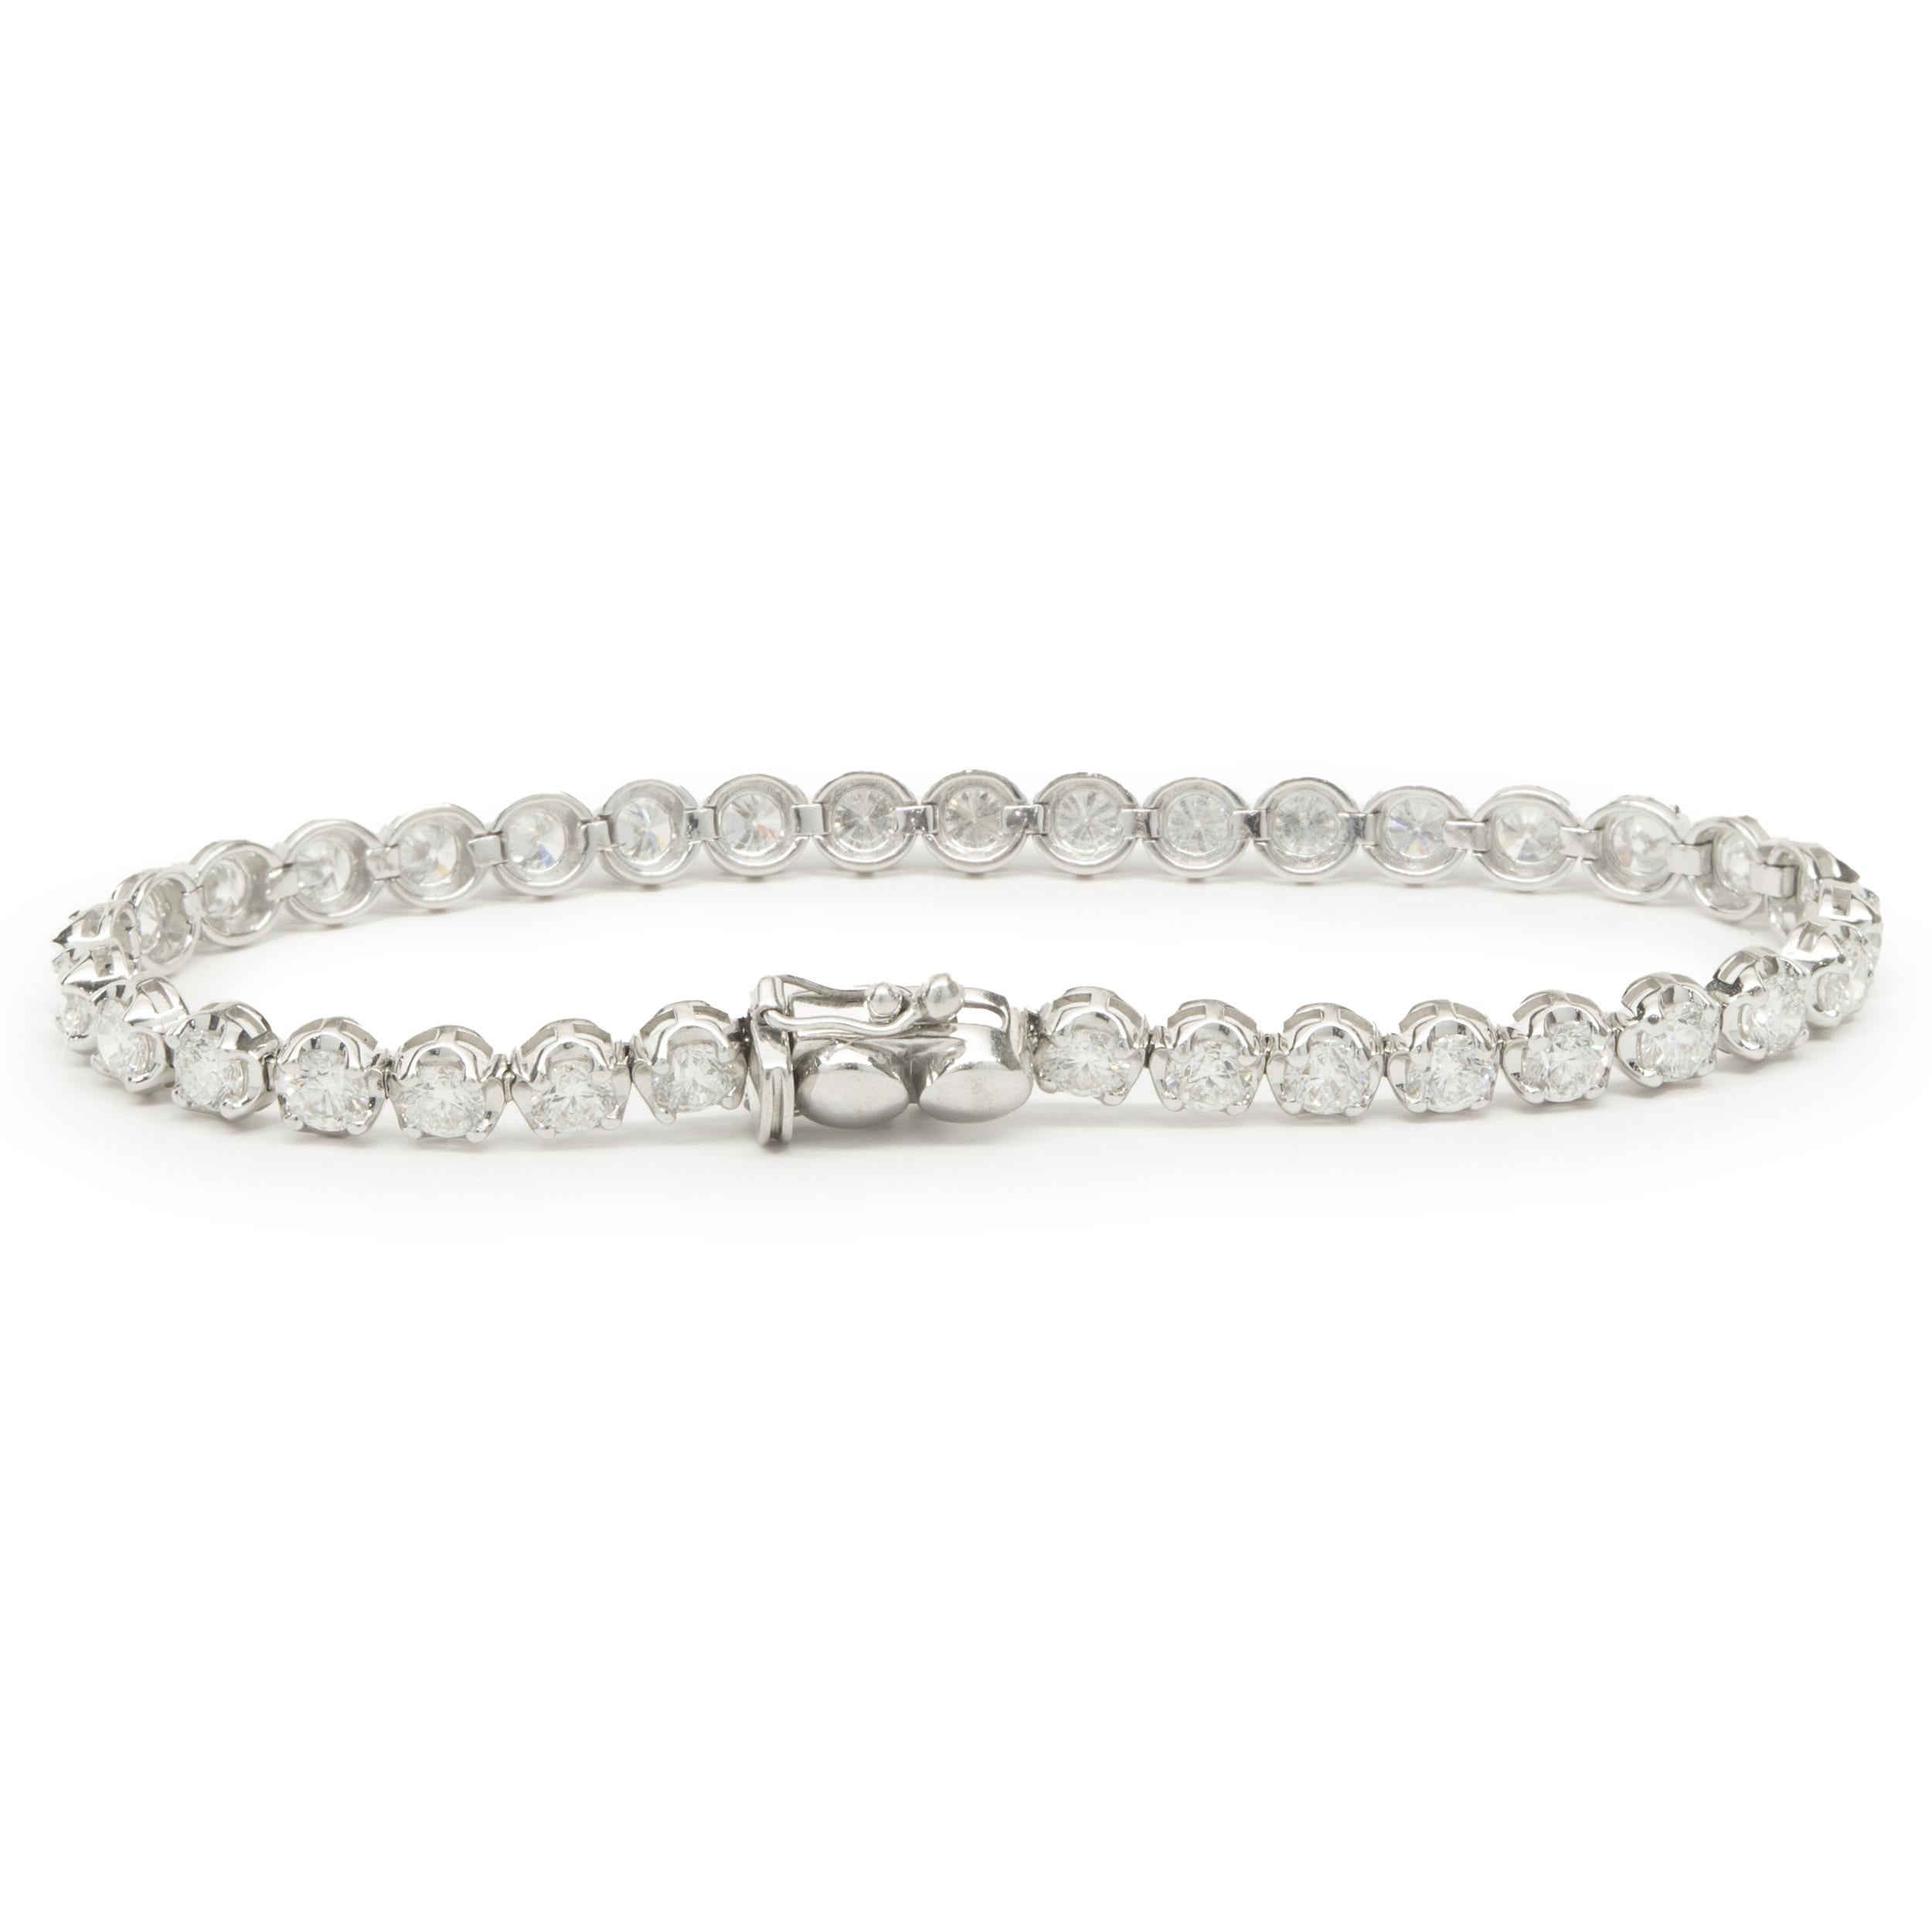 Material: 18K white gold
Diamonds: 34 round brilliant cut = 7.05cttw
Color: G
Clarity: VS-SI1
Dimensions: bracelet will fit up to a 7.25-inch wrist
Weight: 13.25 grams
